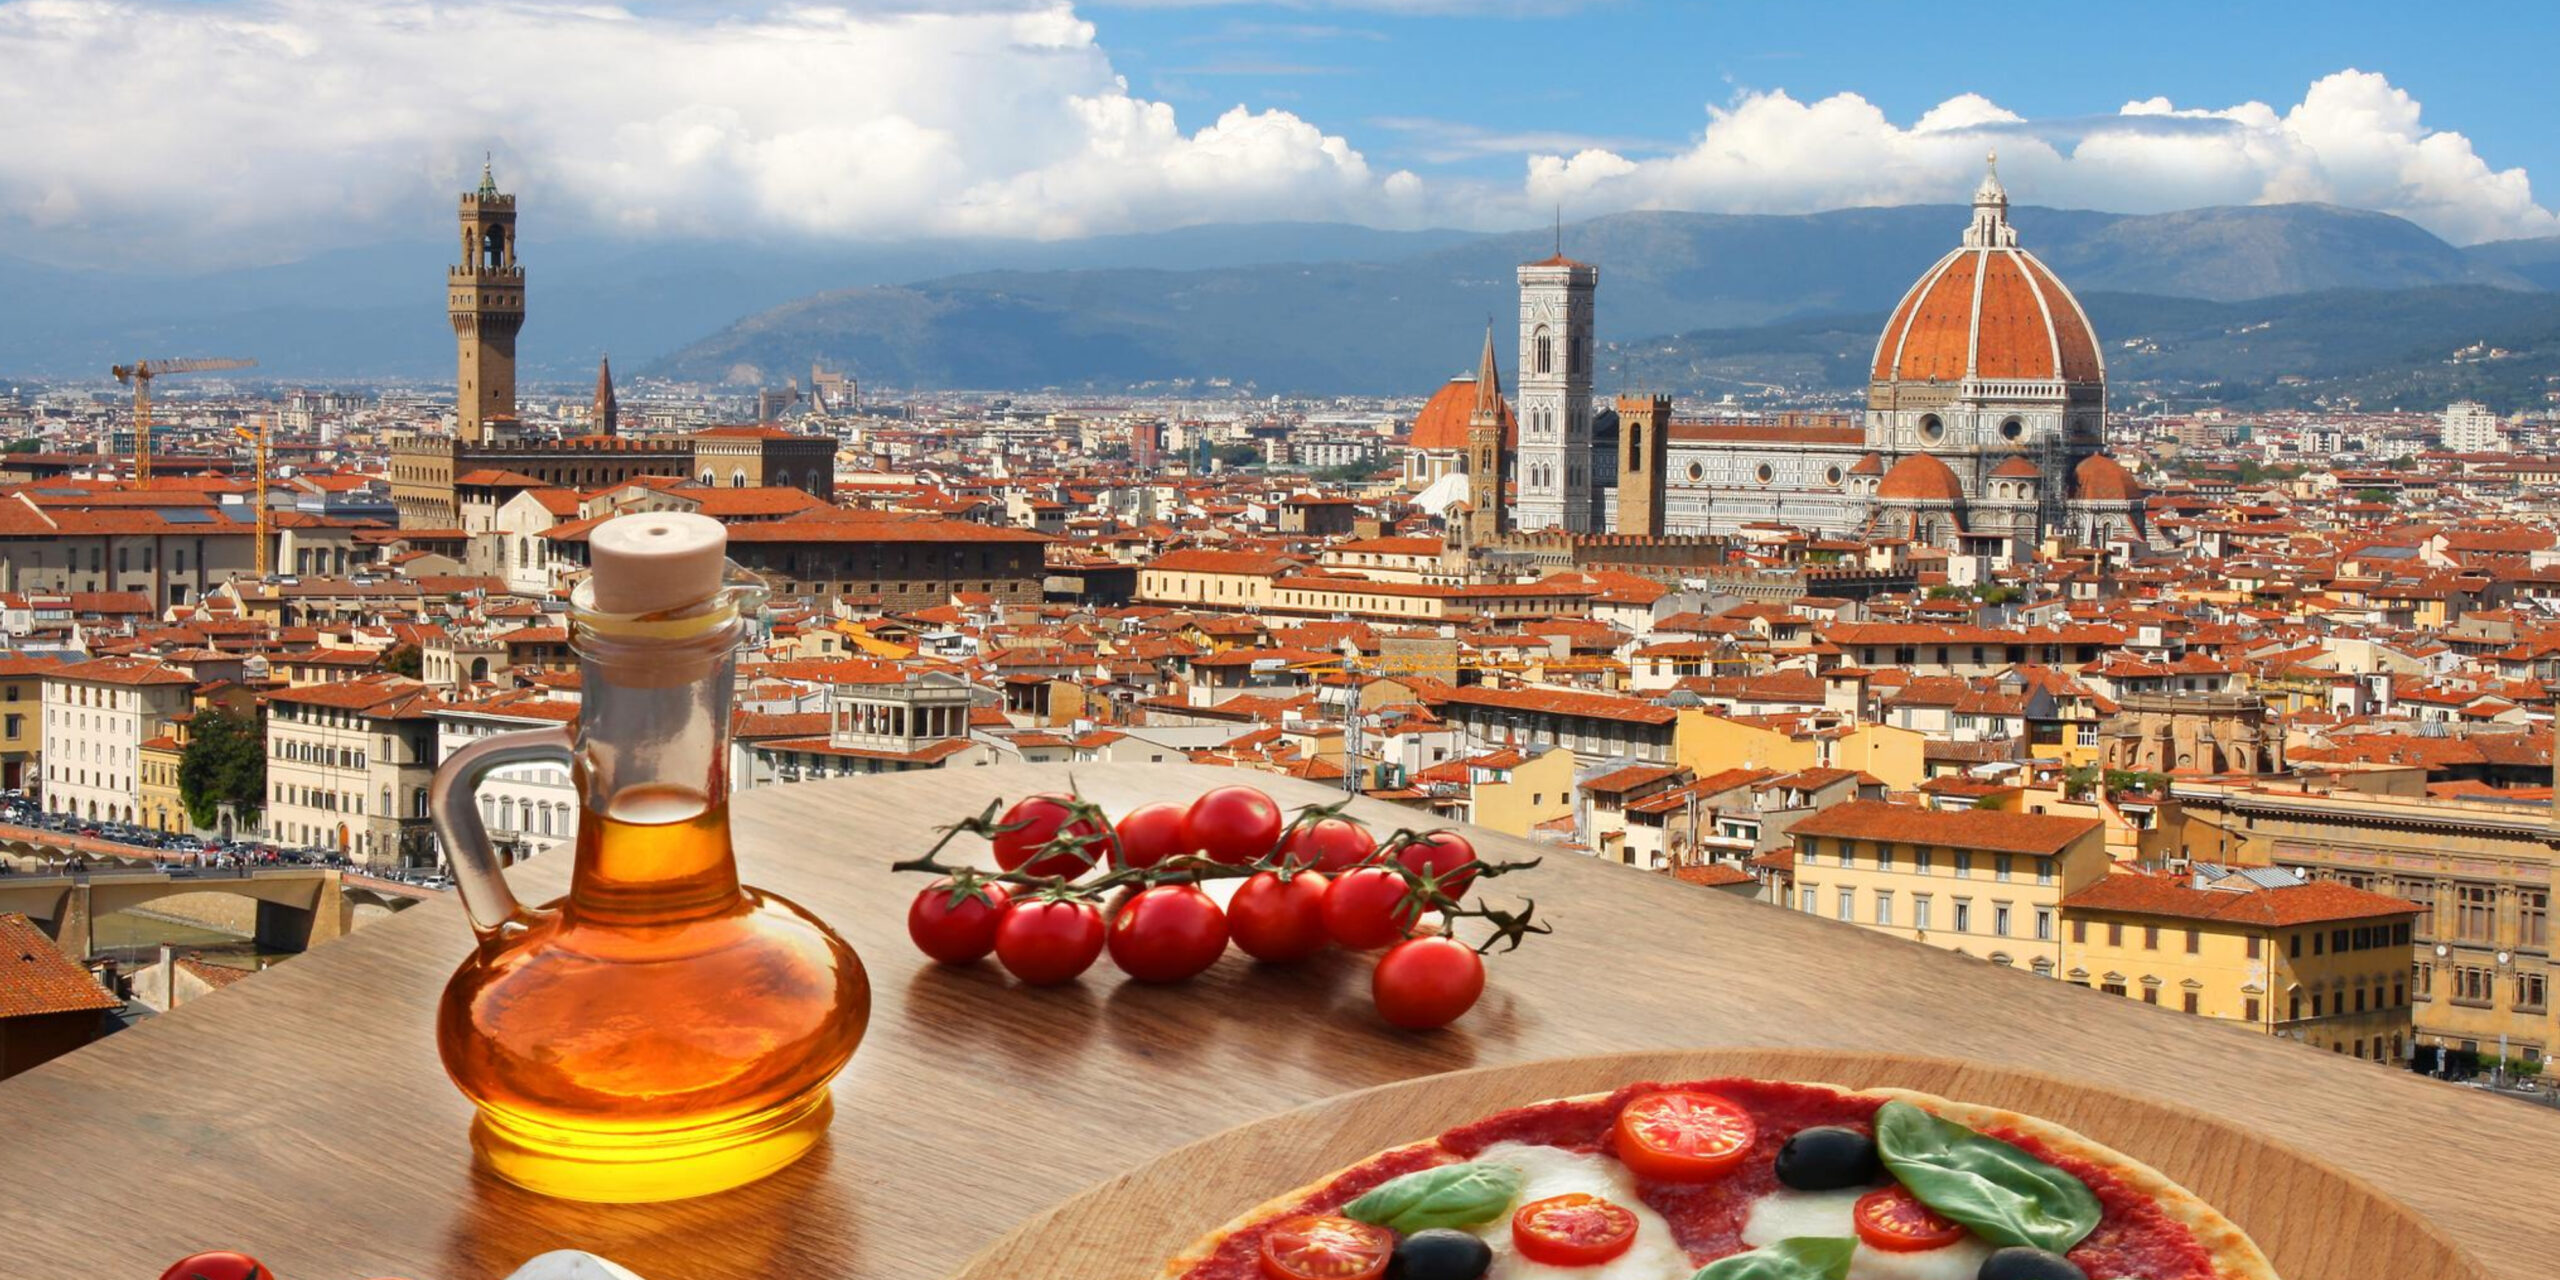 Immerse Yourself in Culture: The Taste of Tuscany Tour